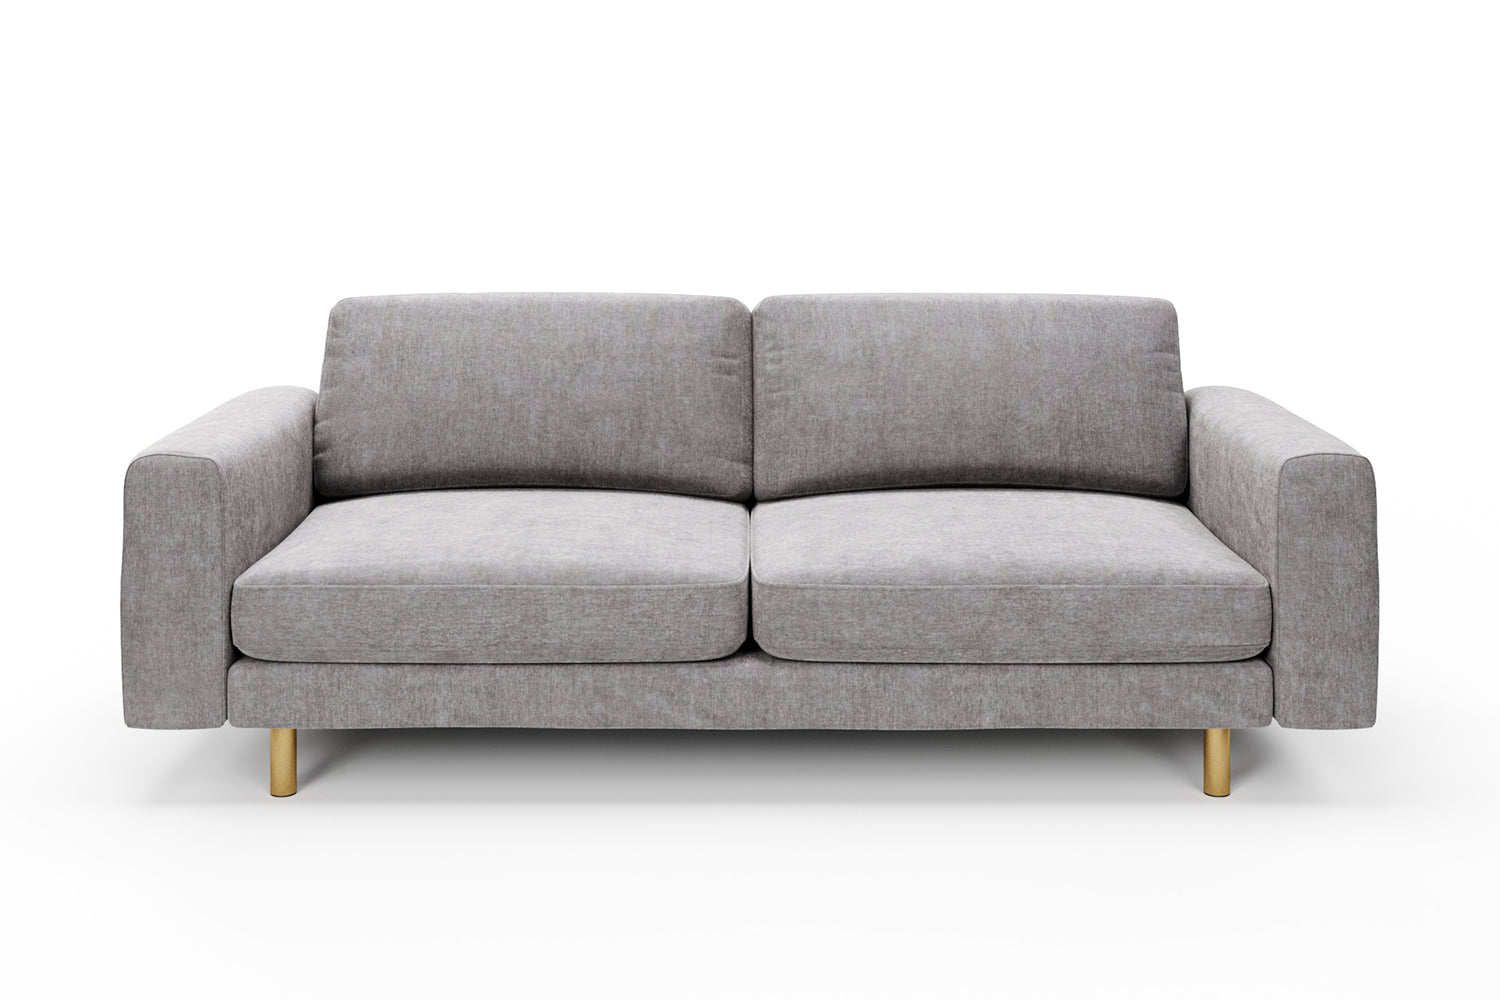 SNUG | The Big Chill 3 Seater Sofa in Mid Grey variant_40414878597168